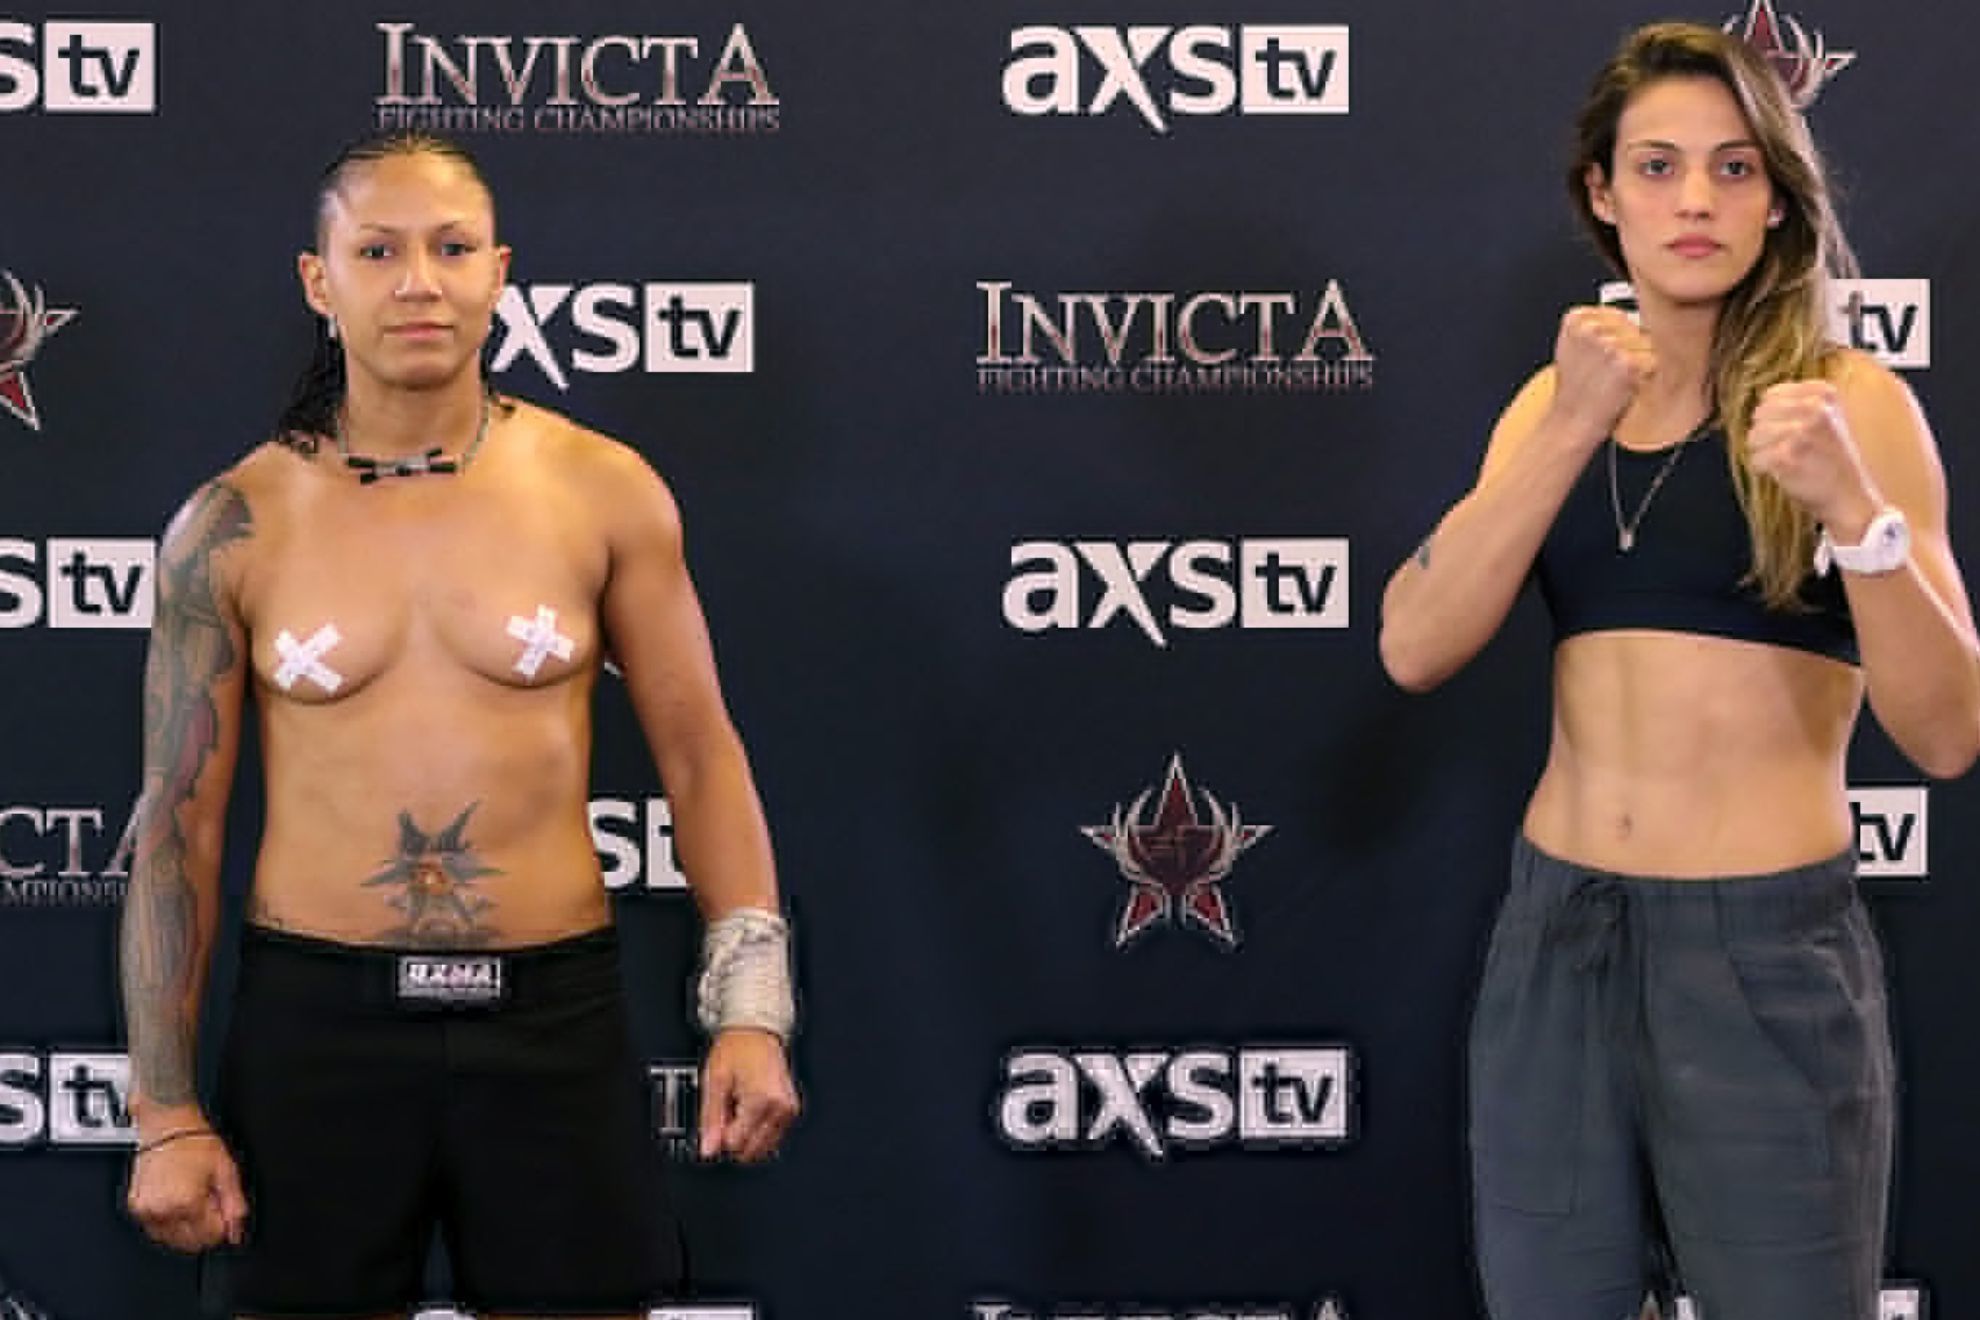 Helen Peralta stages her topless protest at Invicta 49 next to her rival, Brazilian Poliana Botelho. -INVICTA